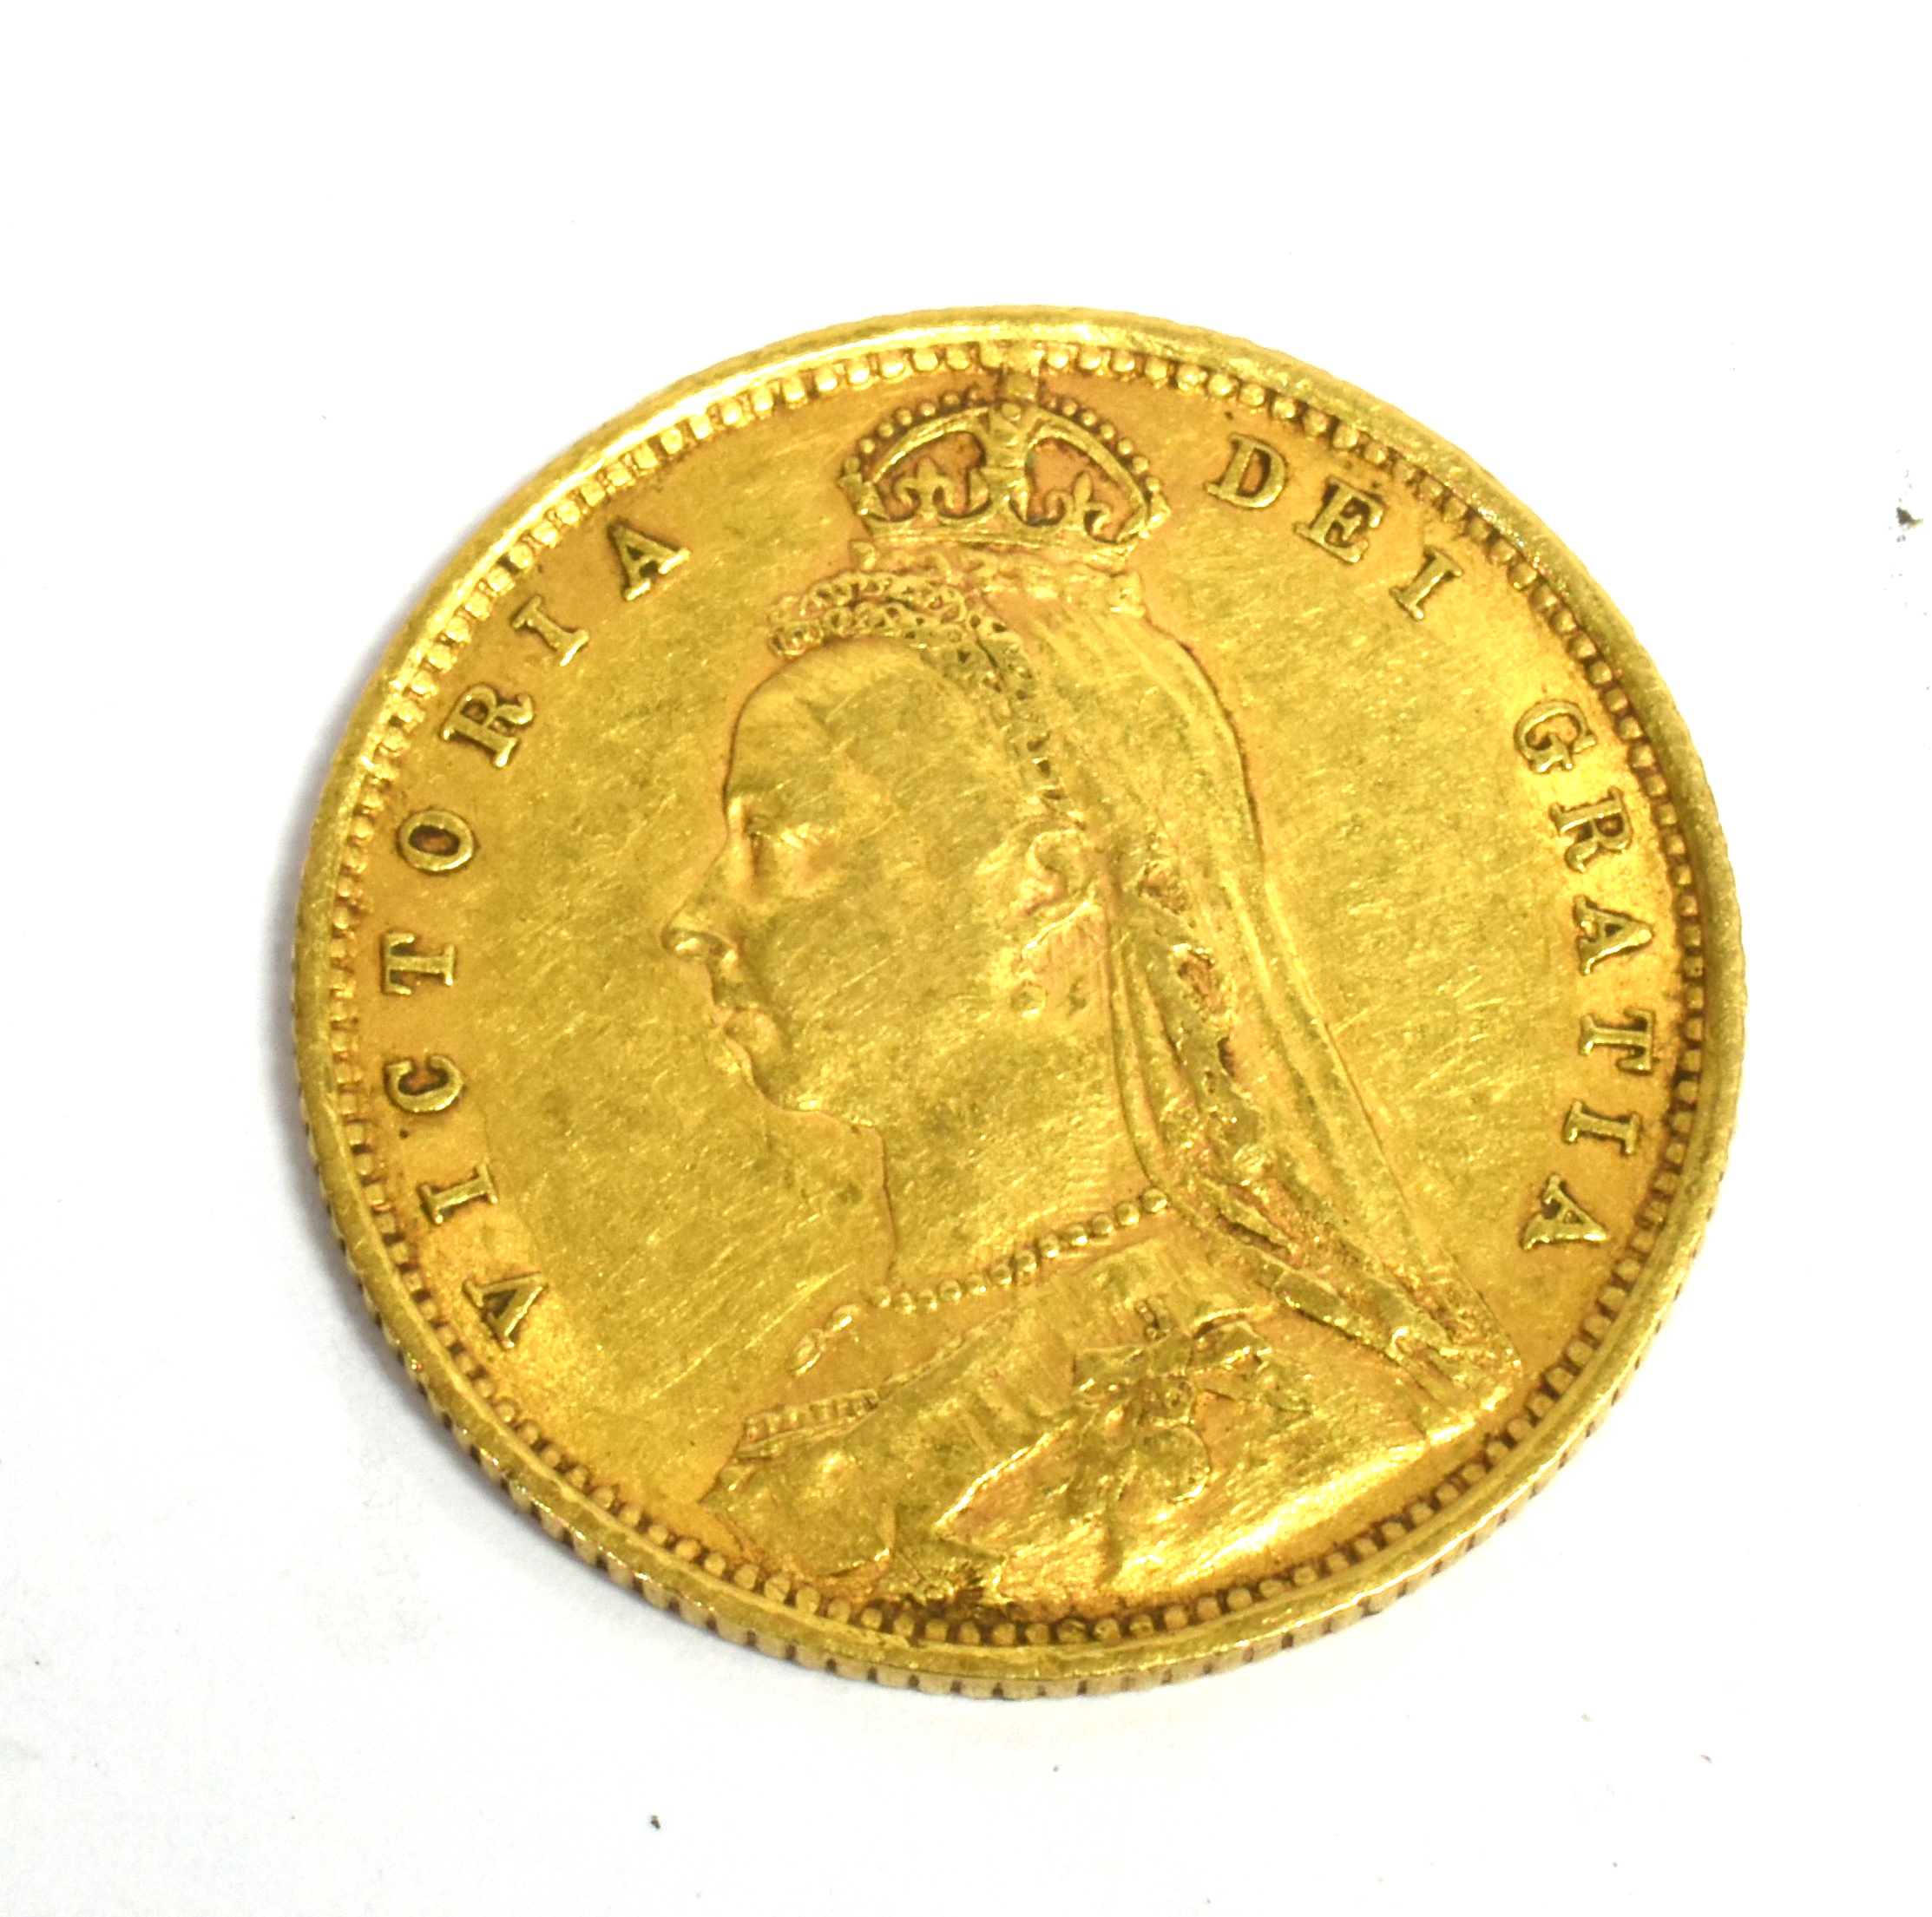 A VICTORIAN HALF SOVERIGN COIN the old head, bust and shield back half sovereign dated 1892